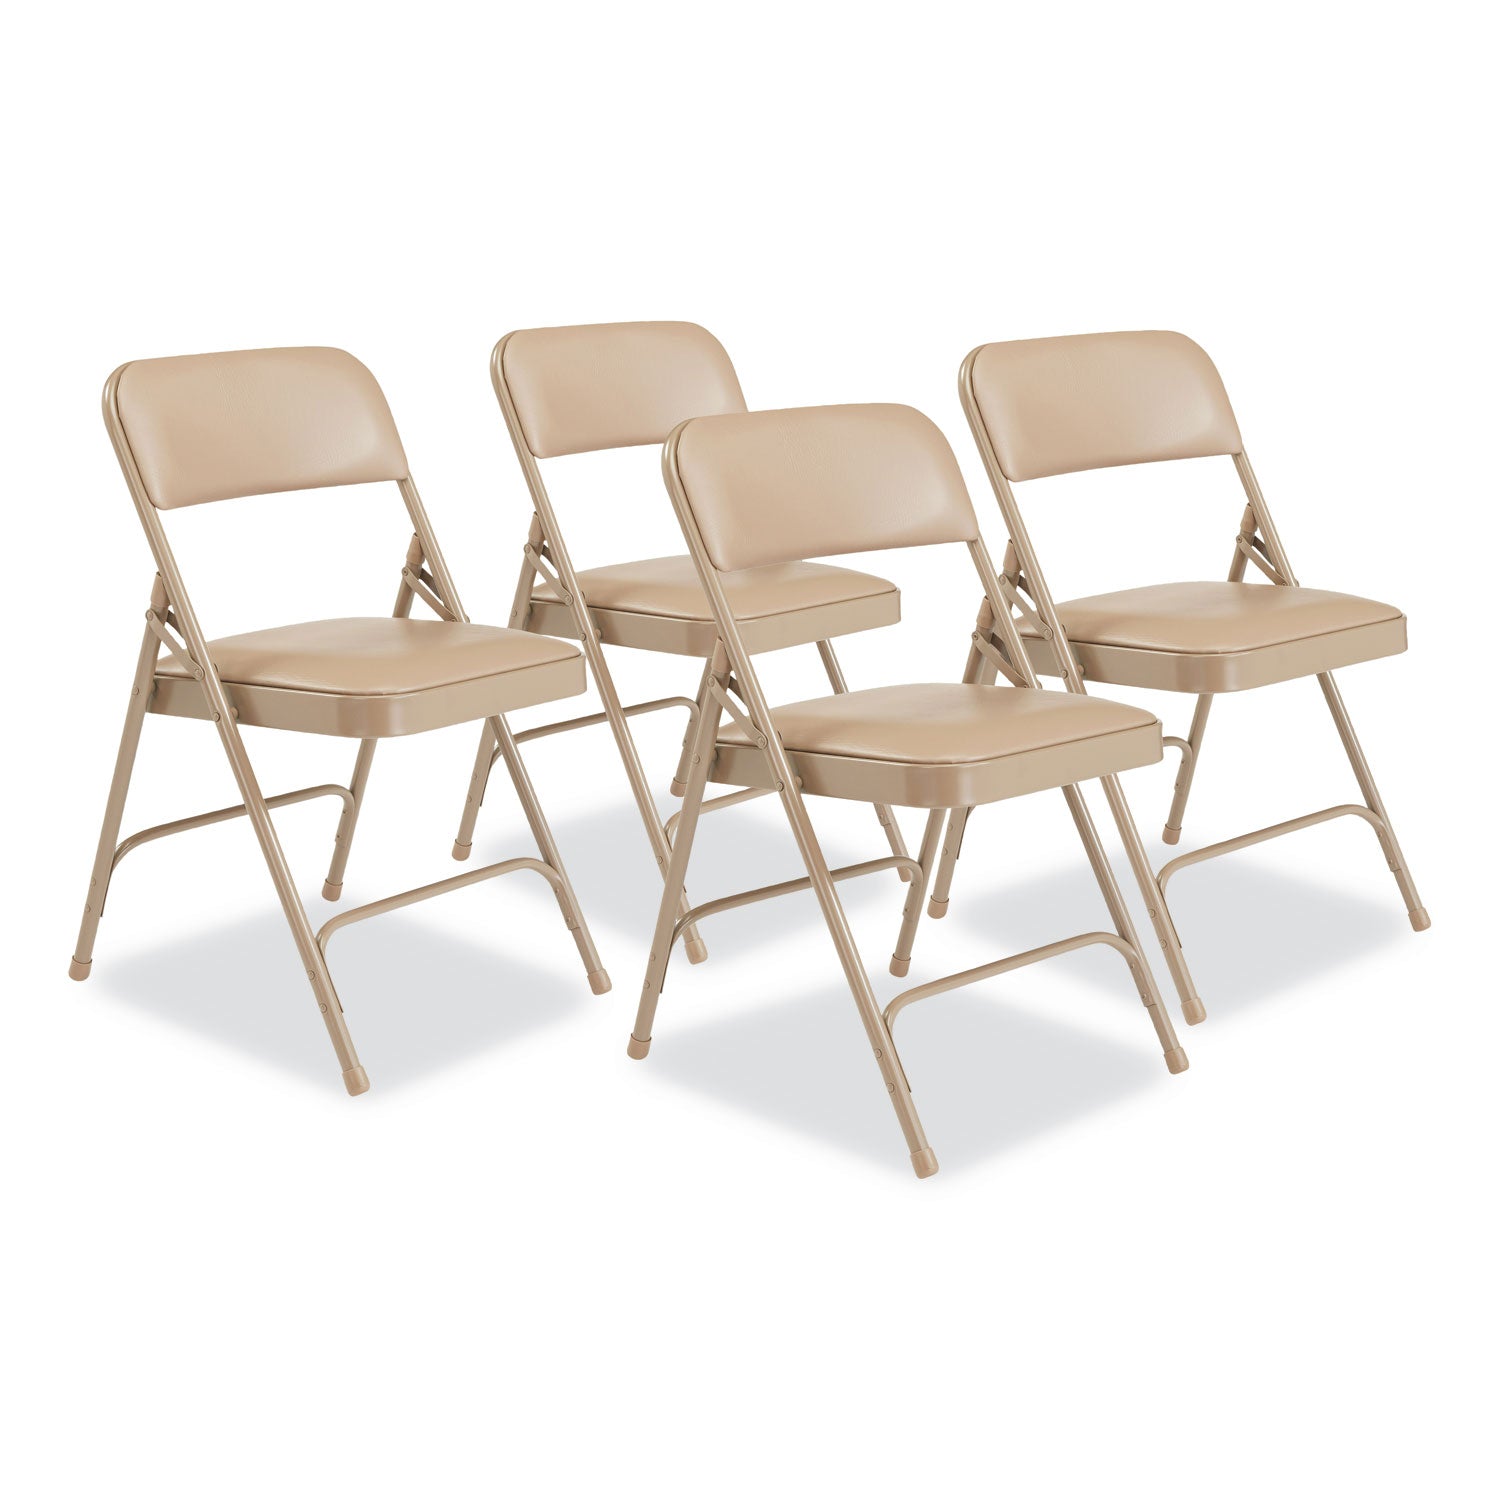 1200-series-premium-vinyl-dual-hinge-folding-chair-supports-500-lb-1775-seat-ht-french-beige-4-ctships-in-1-3-bus-days_nps1201 - 1